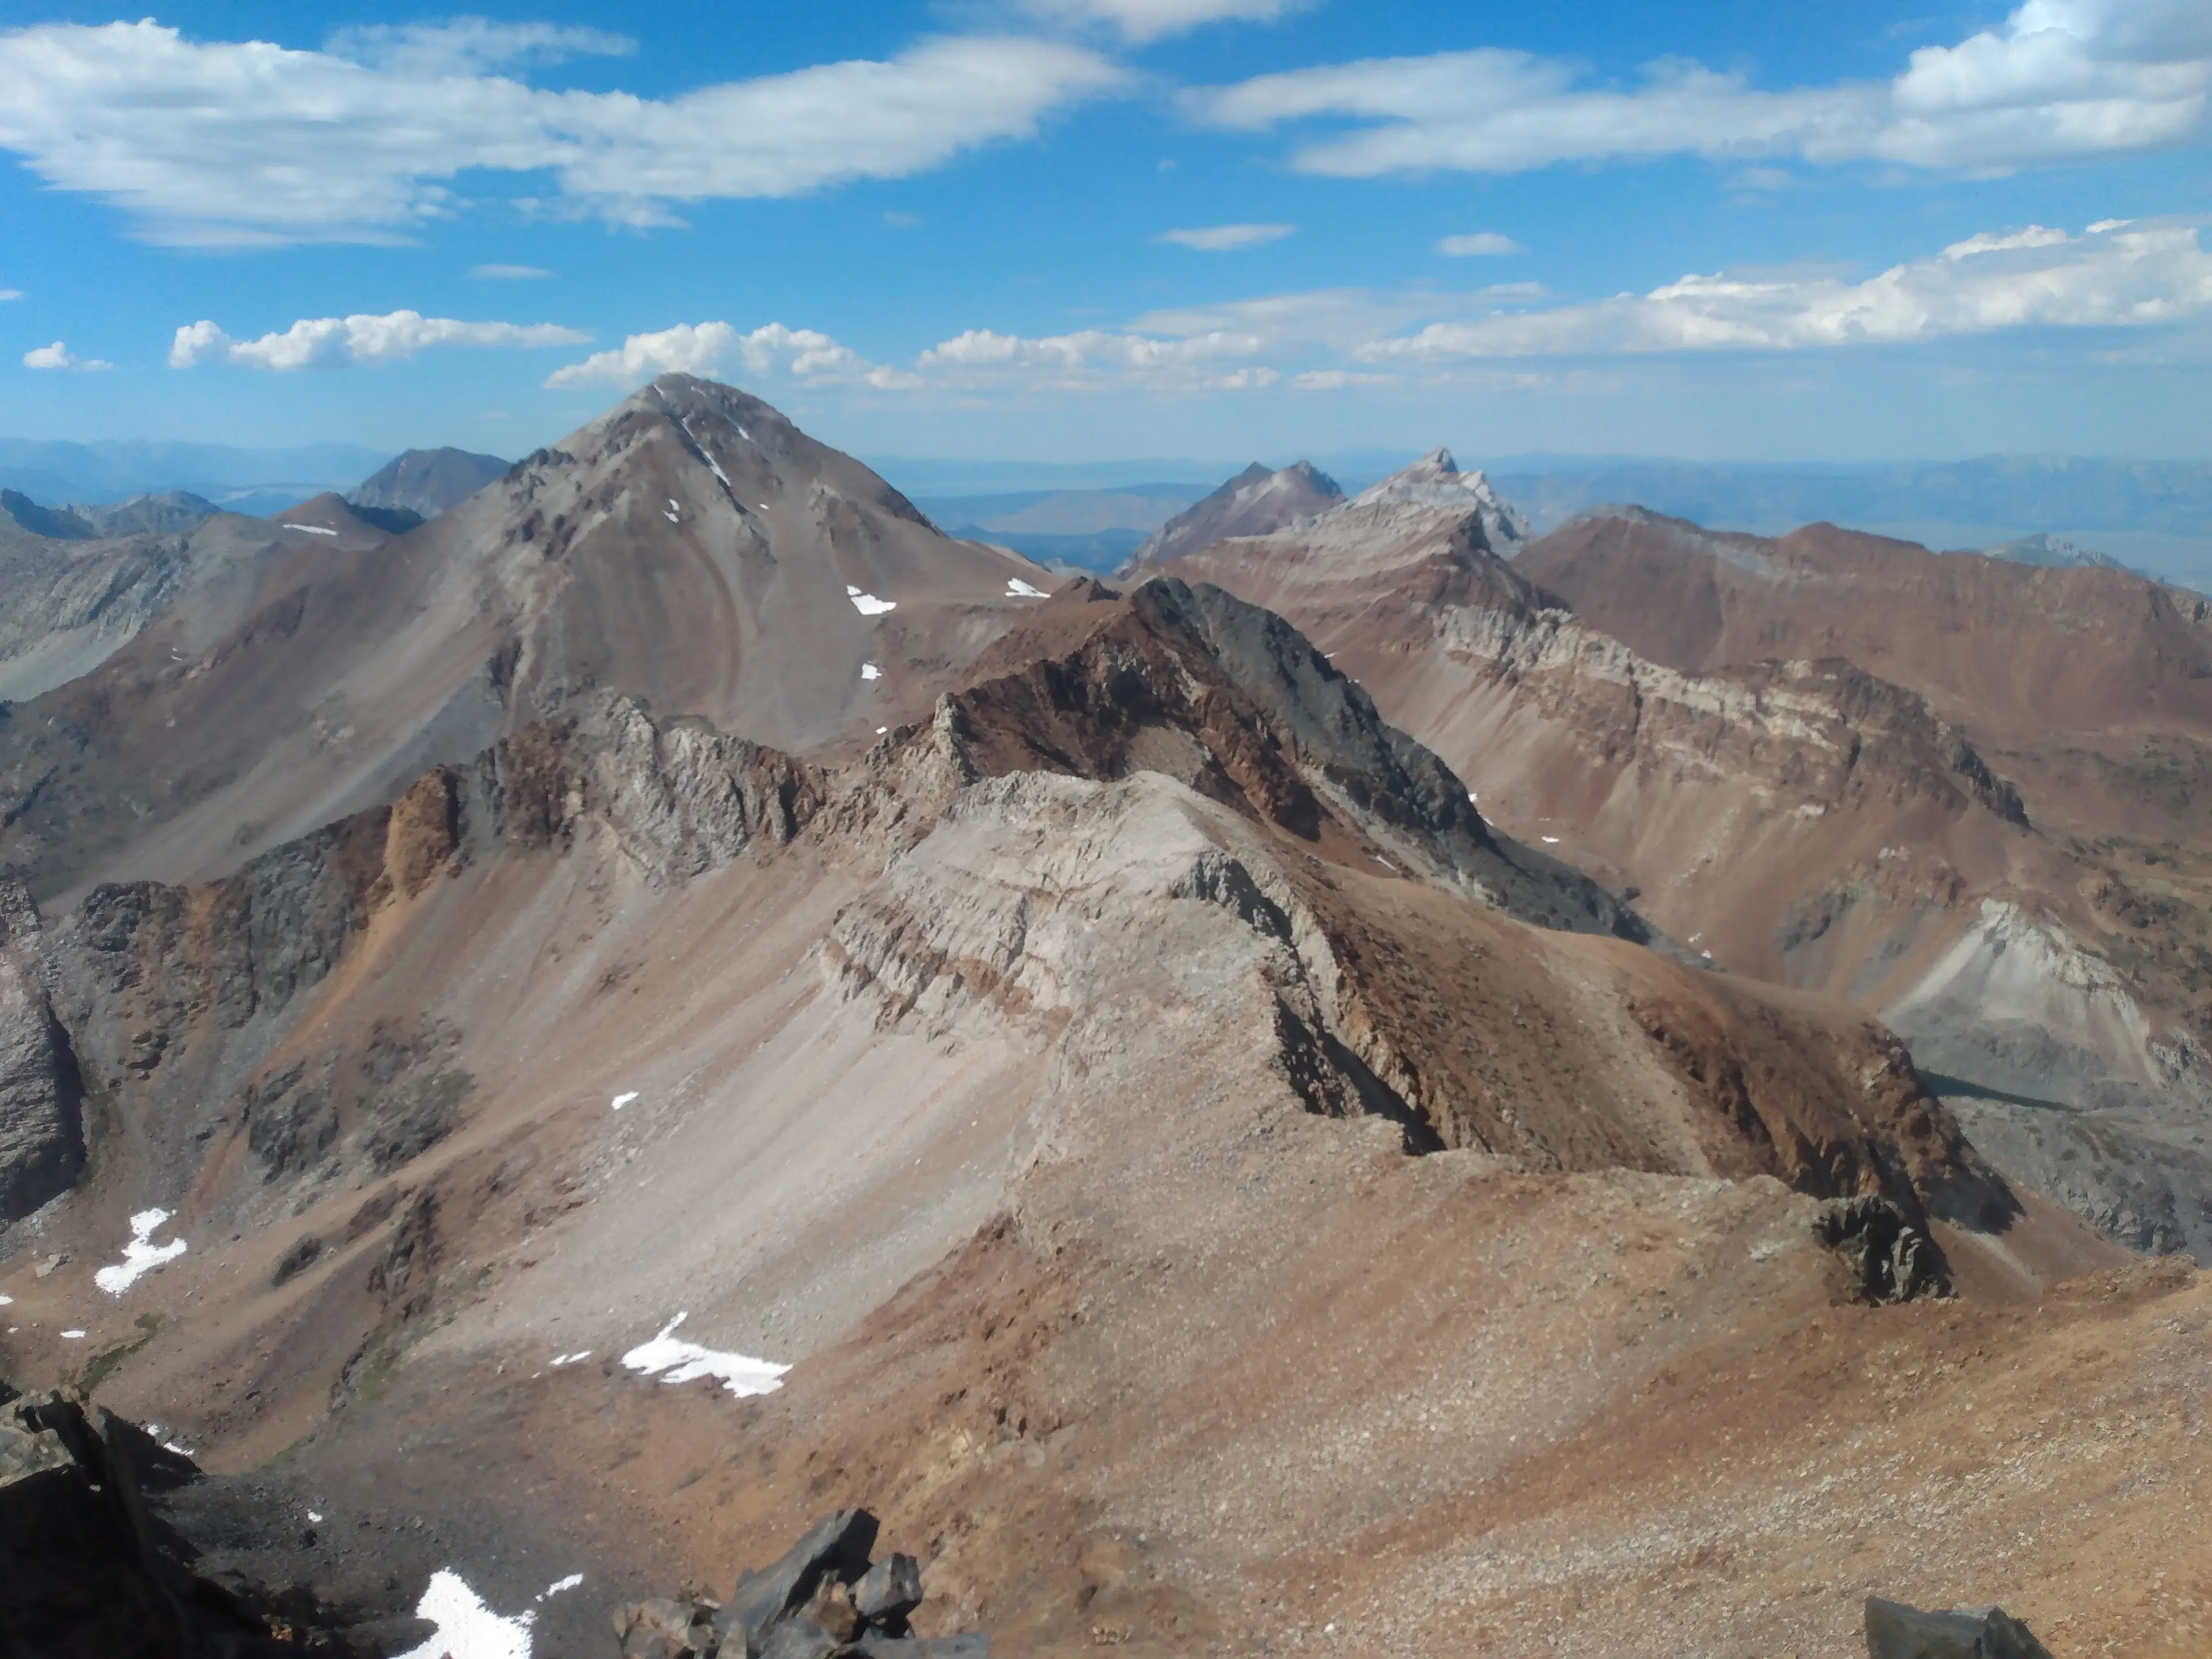 Red Slate Mountain (L), Mount Morrison (C), and Mount Baldwin (R)